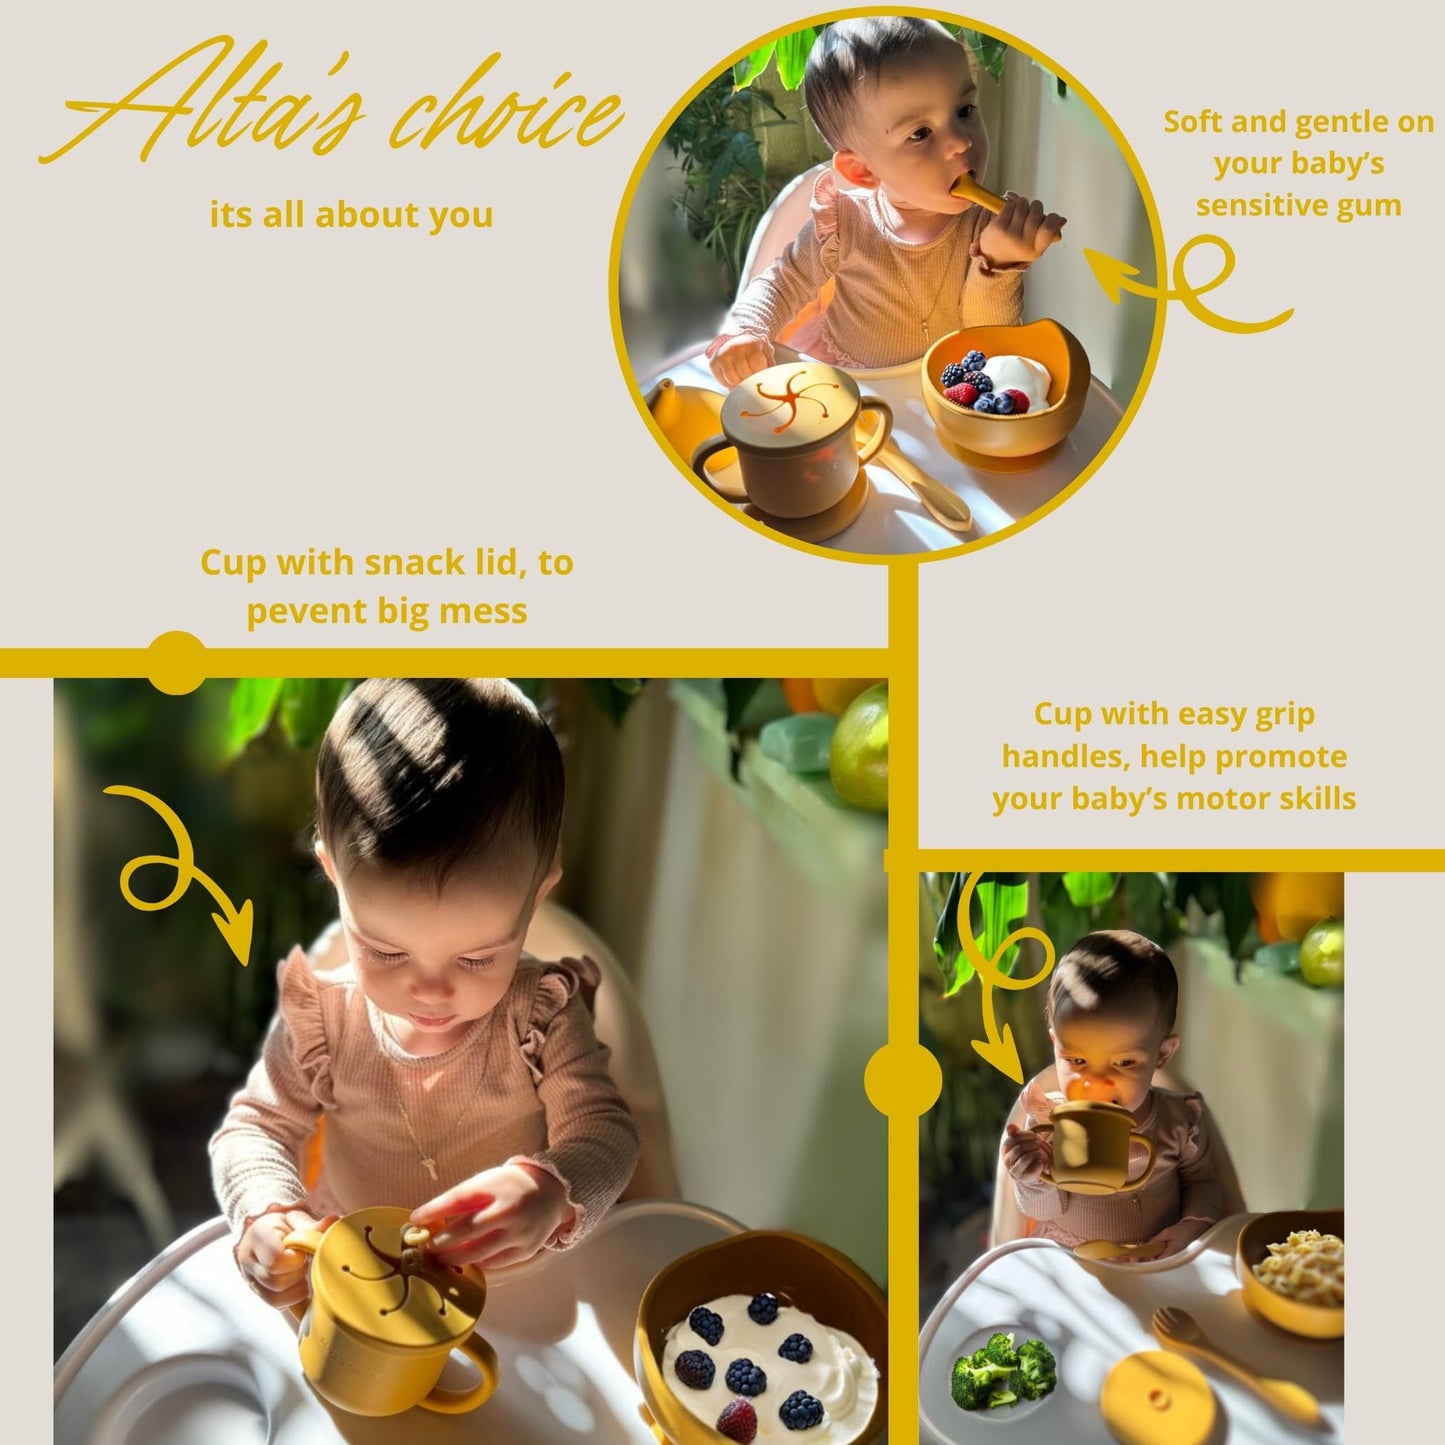 ALTA'S CHOICE Silicone Baby and Toddler Feeding Set. BPA free baby led weaning feeding supplies. Suction bowl, spoon and fork, sippy cup, snack and straw lid. For kids 6+ months. (MUSTARD)